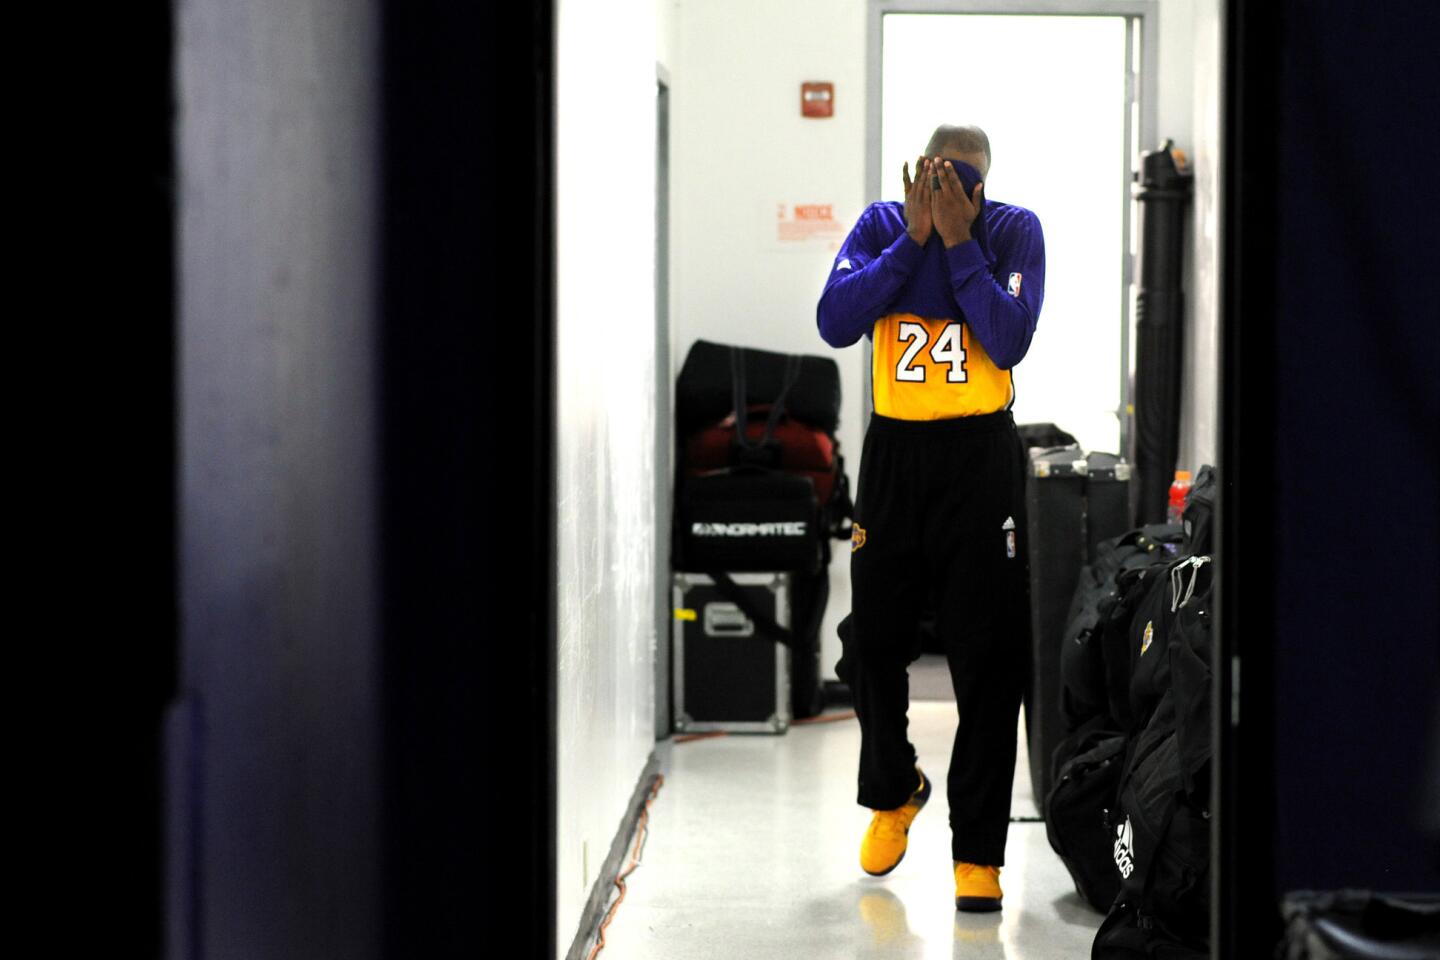 Kobe Bryant wipes his face as he leaves the Sleep Train Arena locker room at halftime during a Lakers game against the Kings in Sacramento on Jan. 7, 2016.